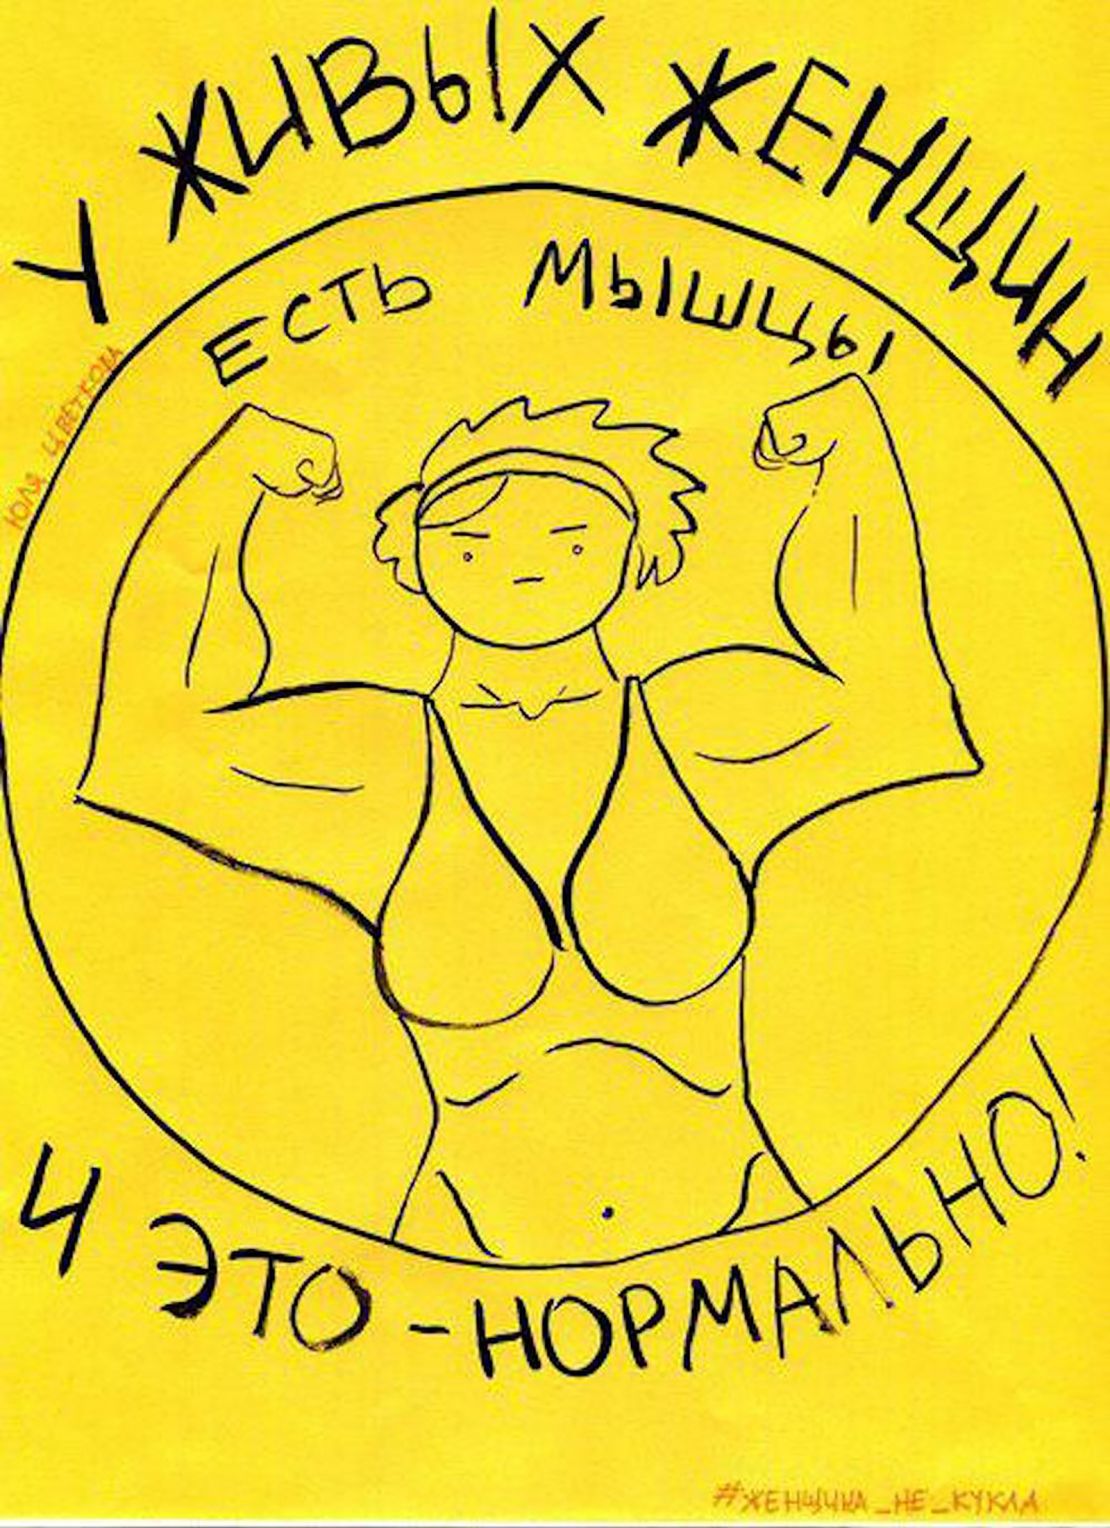 "Women who are alive have muscles and this is fine!" A drawing by Tsvetkova